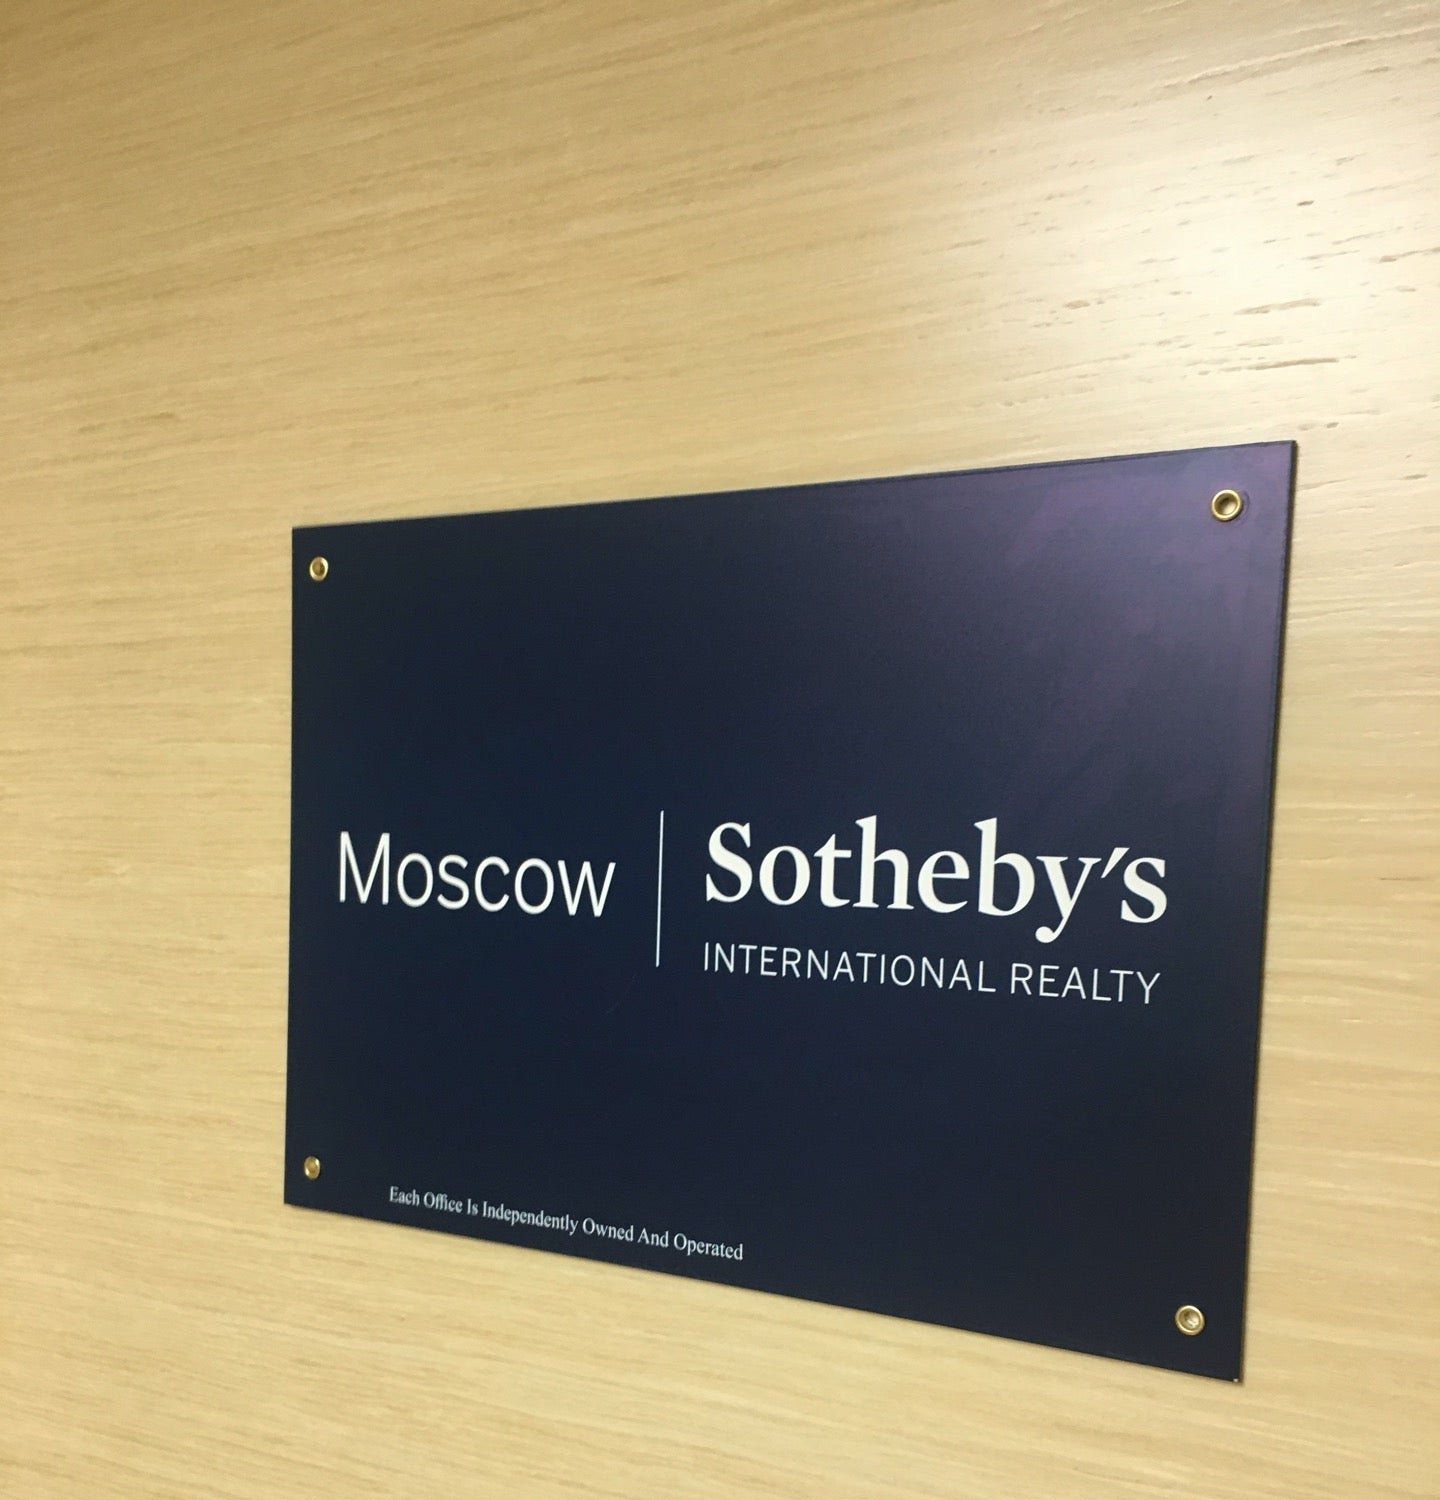 Realty москва. Логотип Sotheby's International Realty.. Агентство недвижимости Sotheby. Moscow Realty Sothebys International Group. Russia Sotheby’s International Realty Moscow руководство.